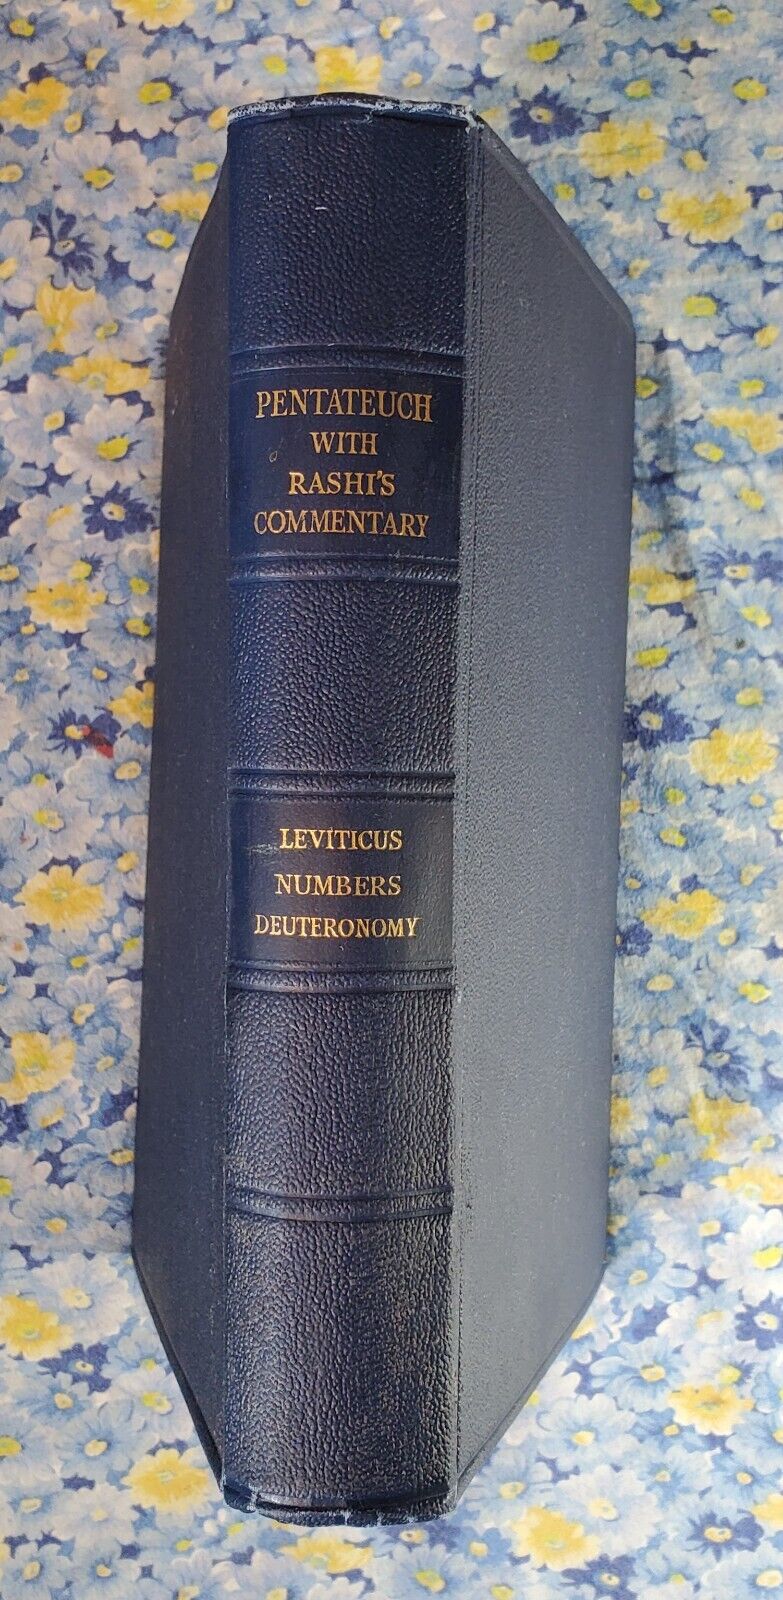 The Pentateuch With Rashi's Commentary- Leviticus, Numbers, Deuteronomy, 1945 HC